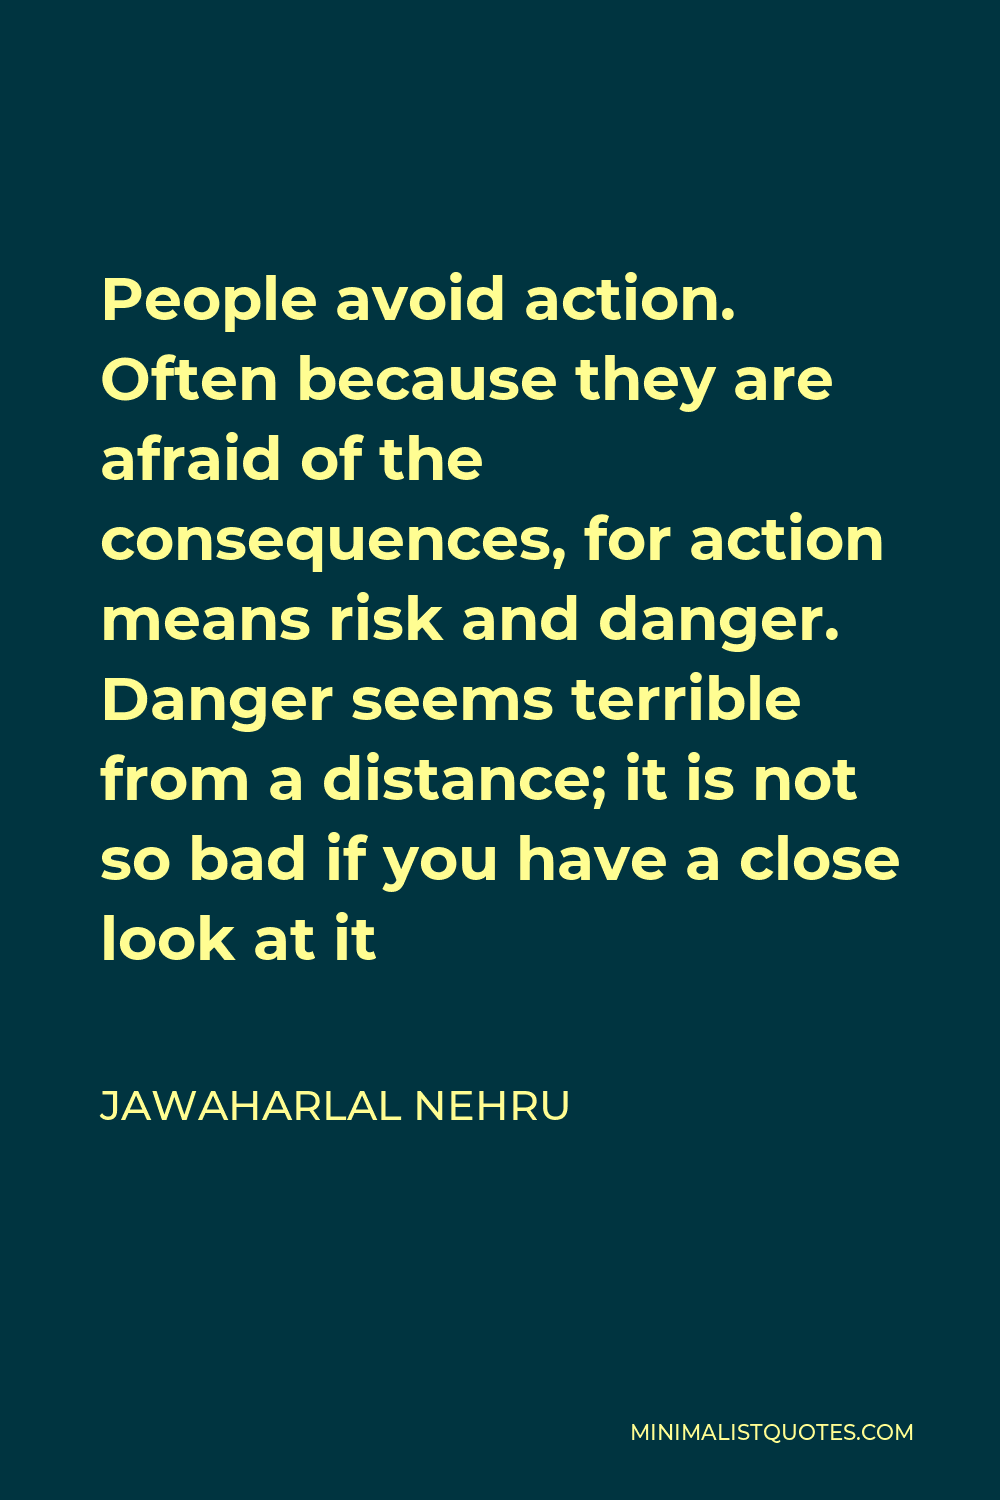 Jawaharlal Nehru Quote - People avoid action. Often because they are afraid of the consequences, for action means risk and danger. Danger seems terrible from a distance; it is not so bad if you have a close look at it